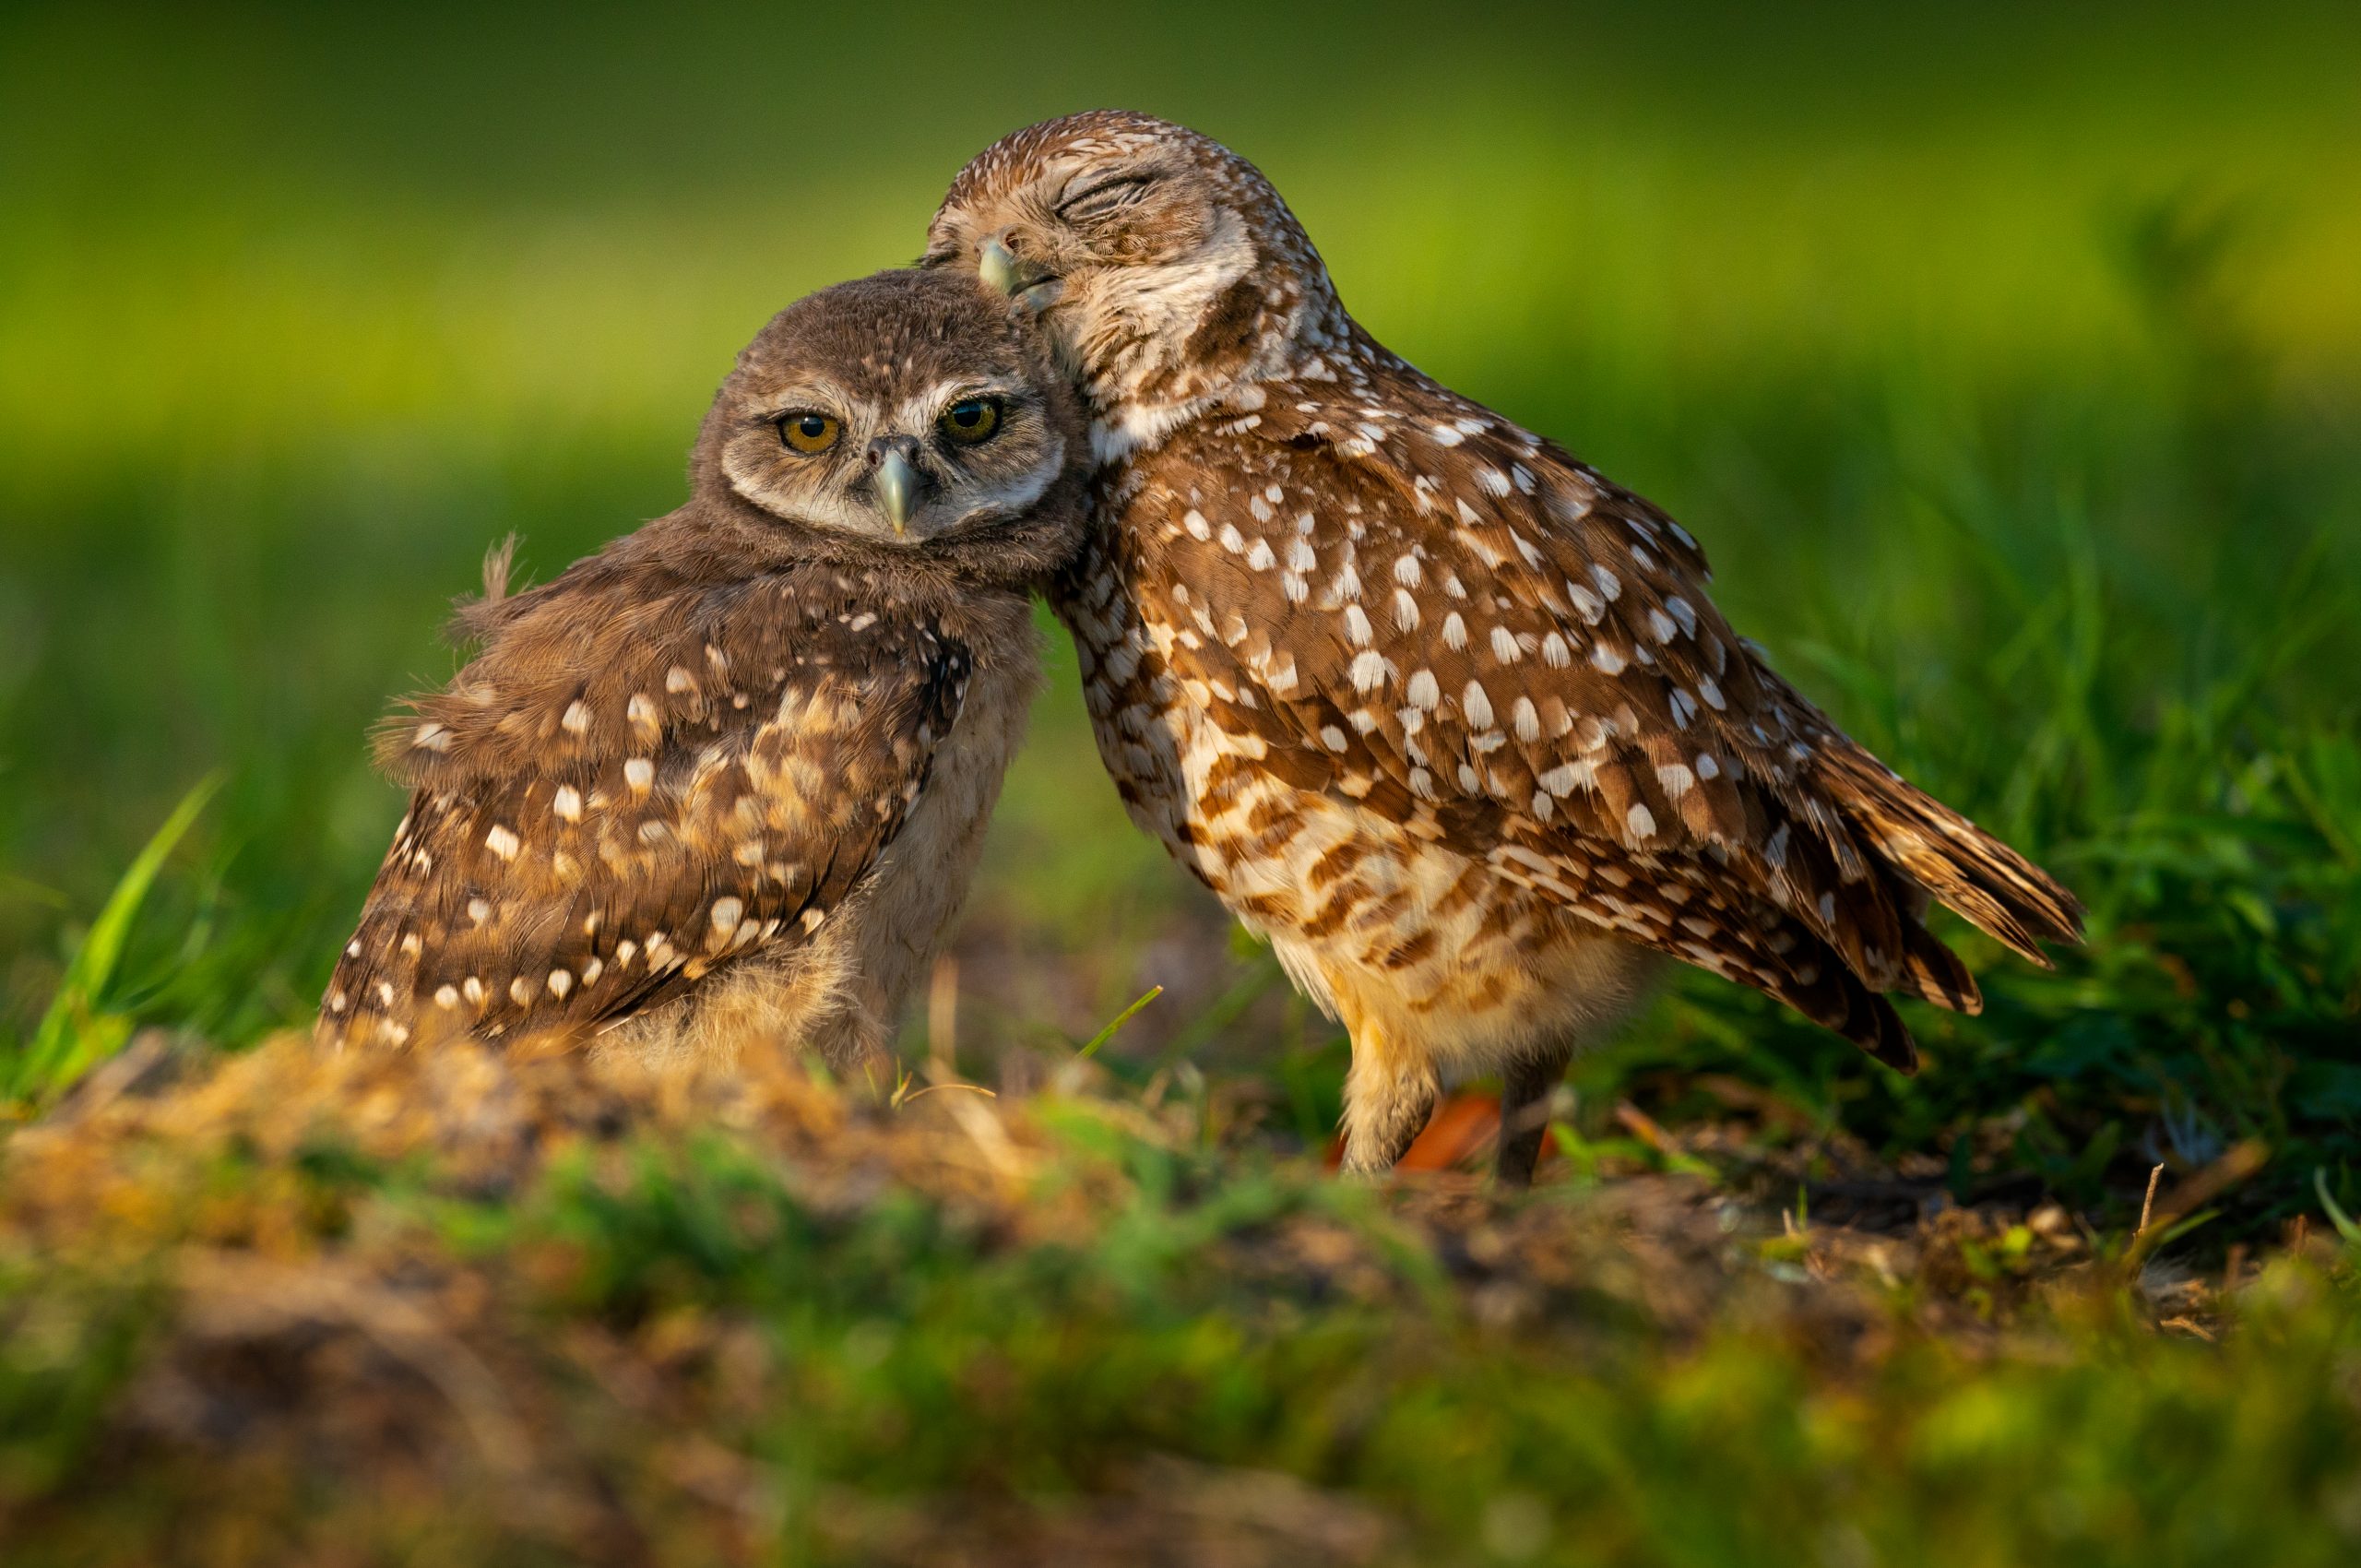 Grand Champion - Affection by Robin Harrison